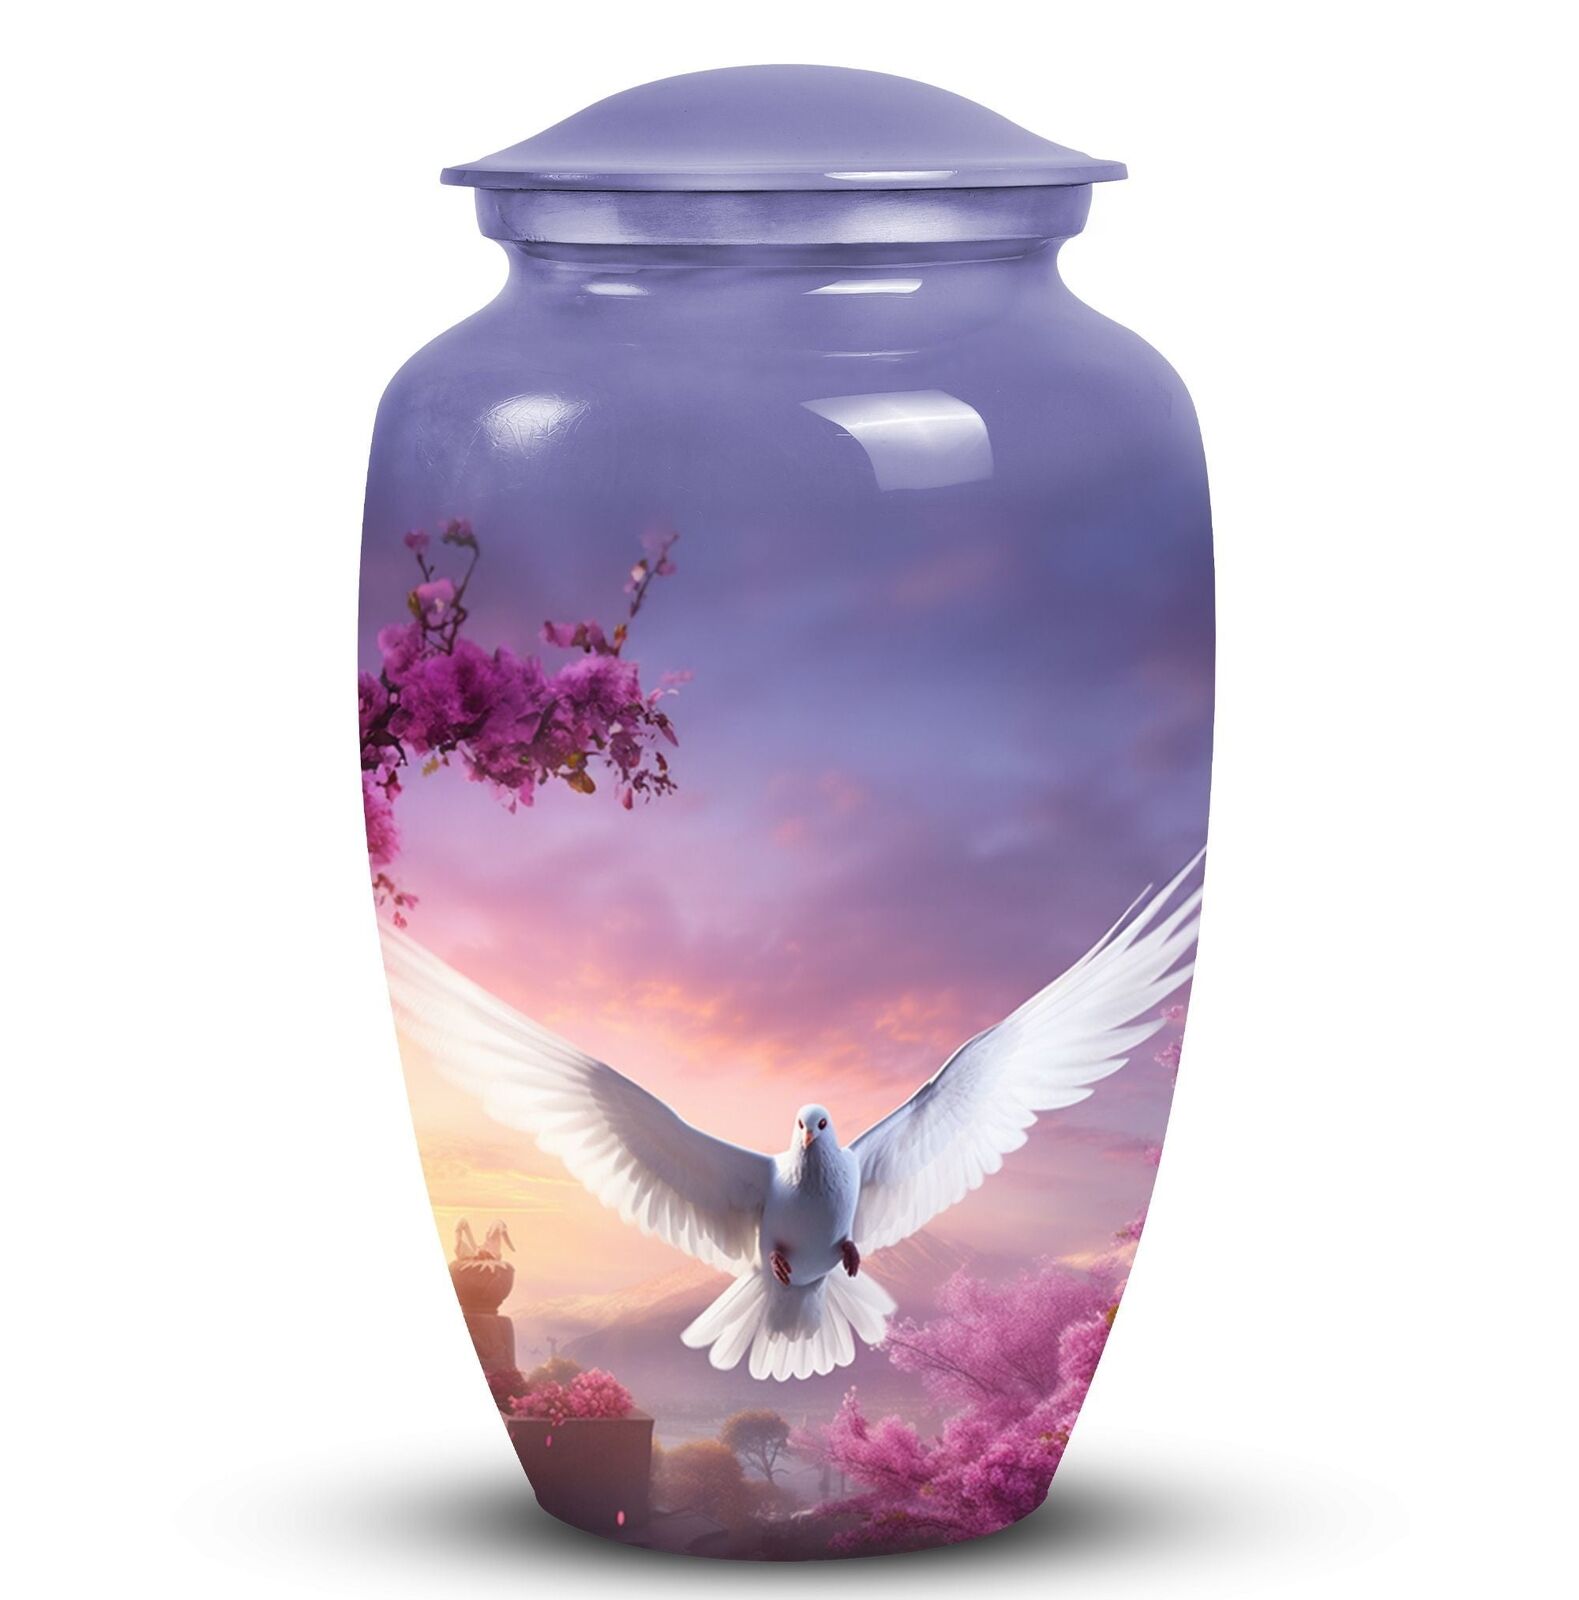 Peaceful Dove Memory: An Elegant Large Cremation Urn for Ashes